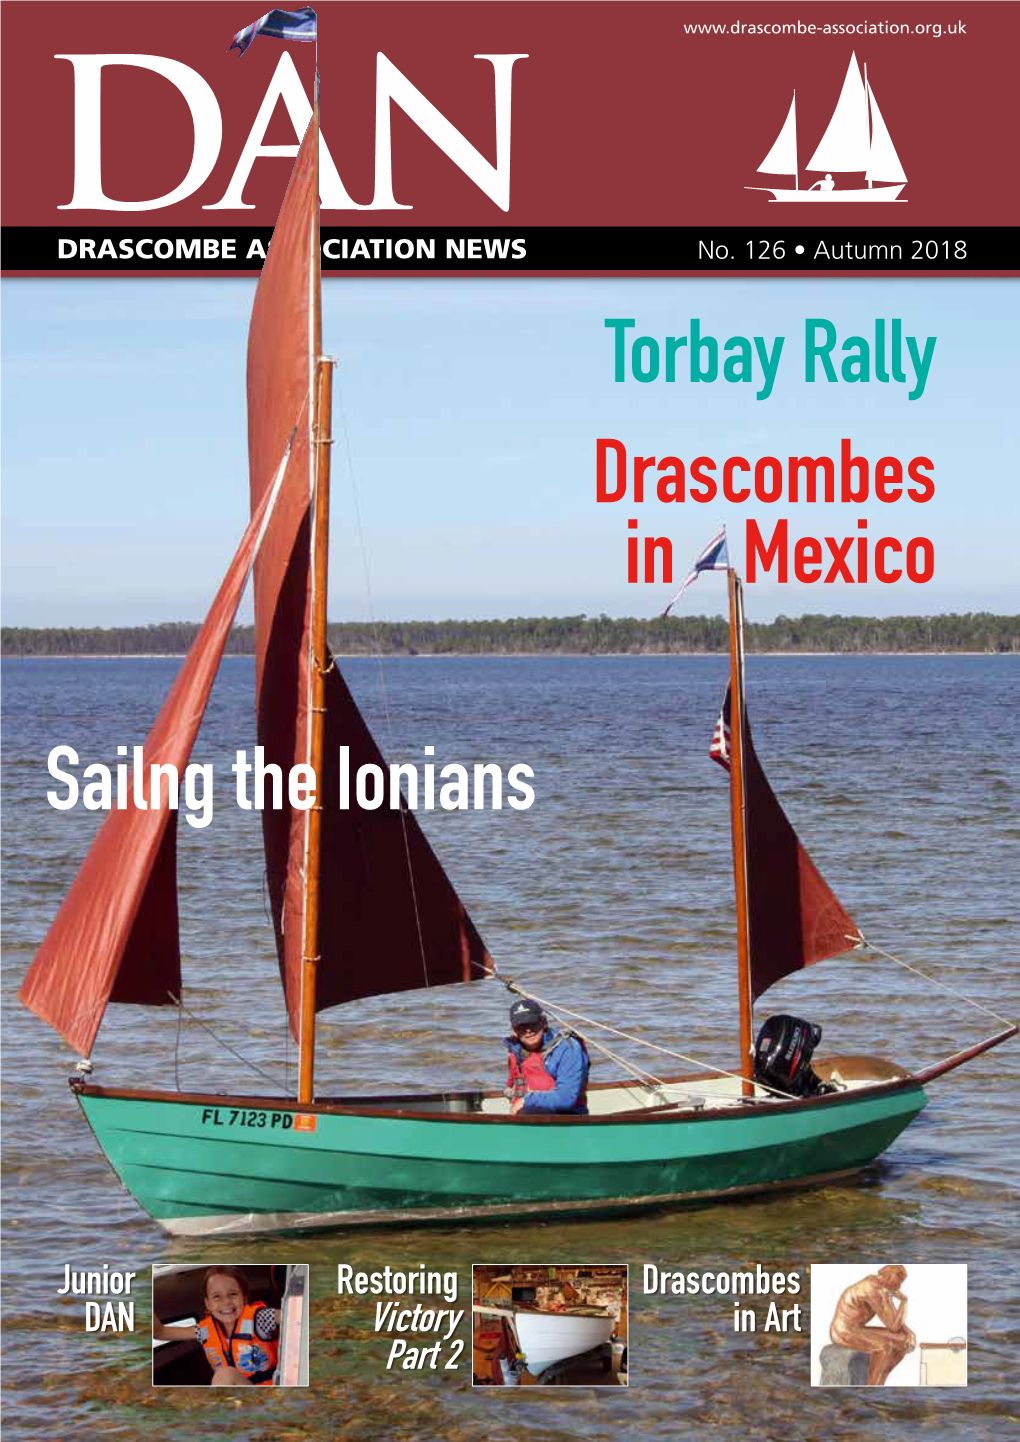 Torbay Rally Sailng the Ionians Drascombes in Mexico